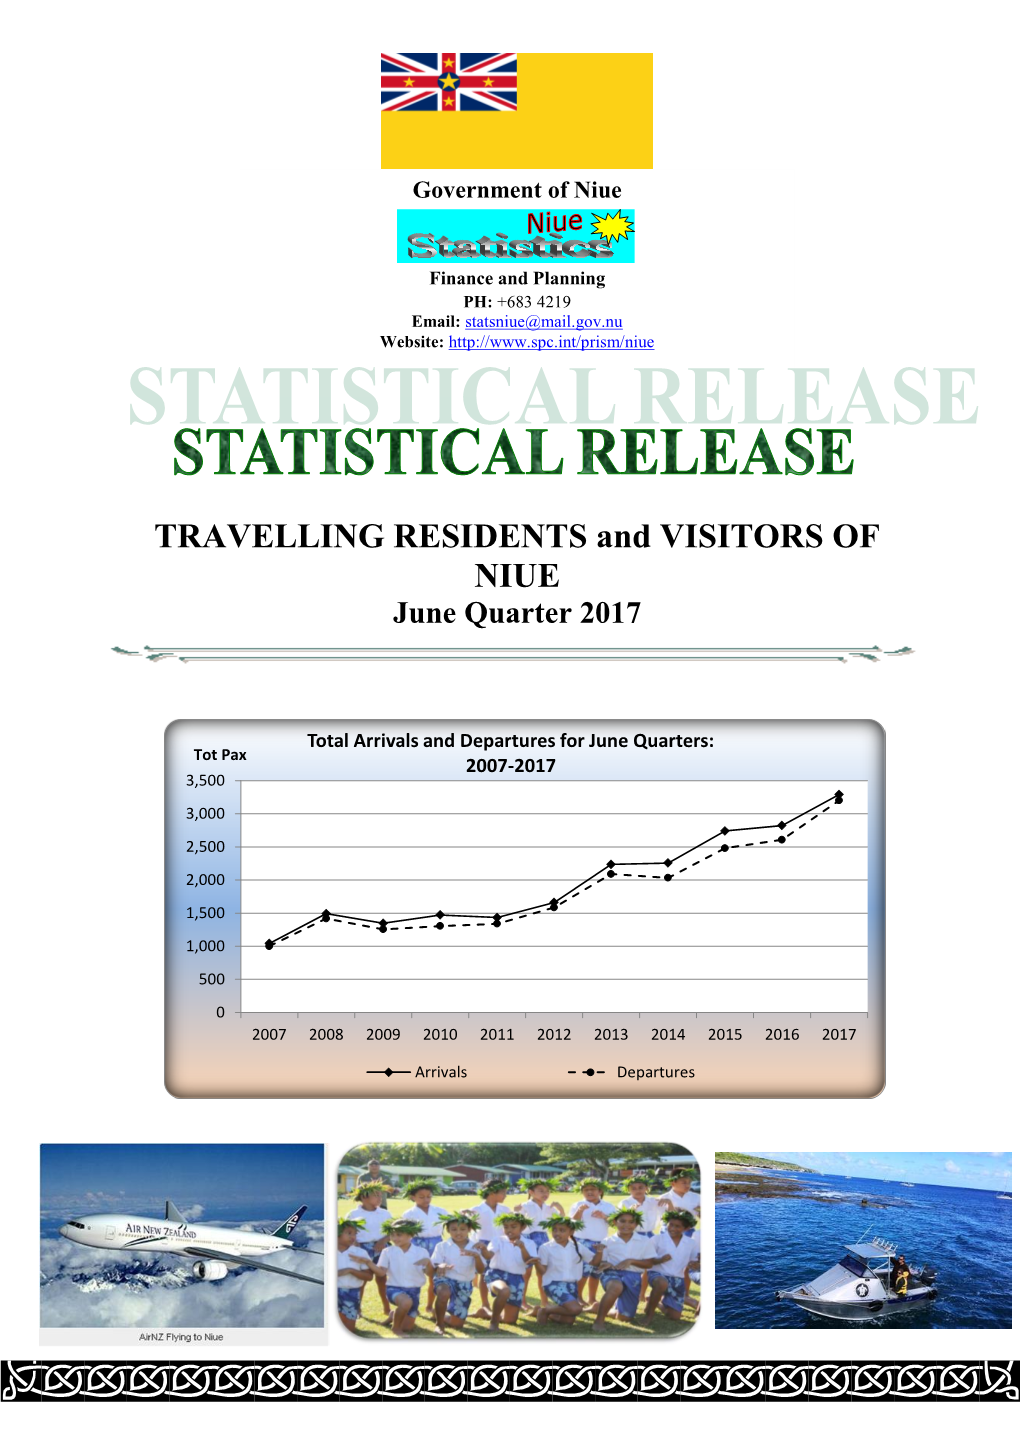 TRAVELLING RESIDENTS and VISITORS of NIUE June Quarter 2017